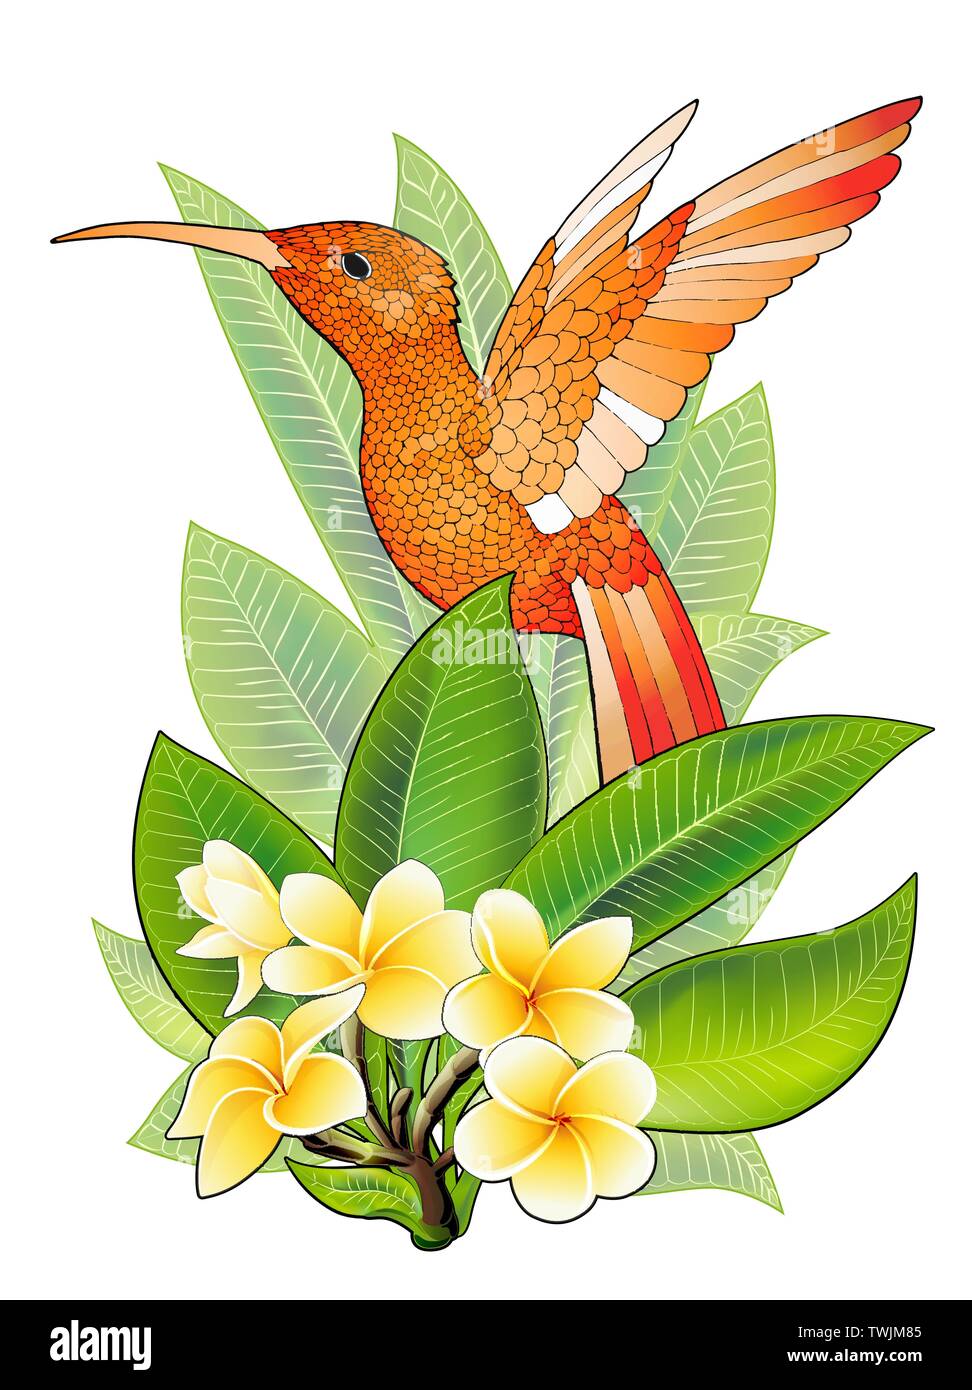 Summer design for advertising with hummingbird, tropical leaves and flowers Stock Vector